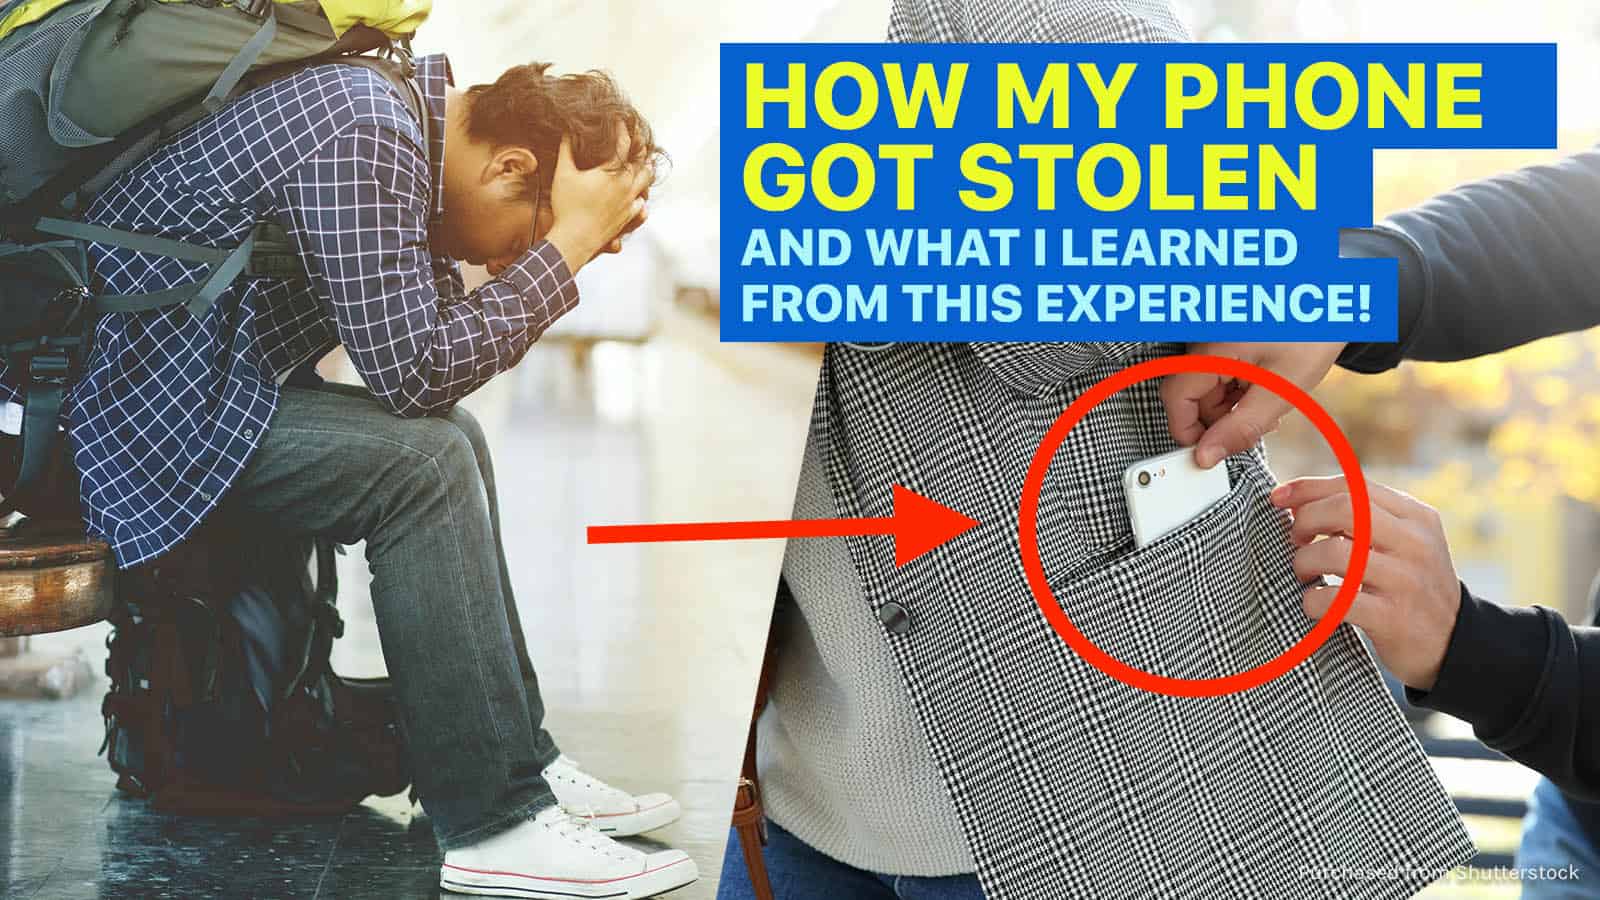 Tourists Beware: 8 TRICKS USED BY PICKPOCKETS IN EUROPE!